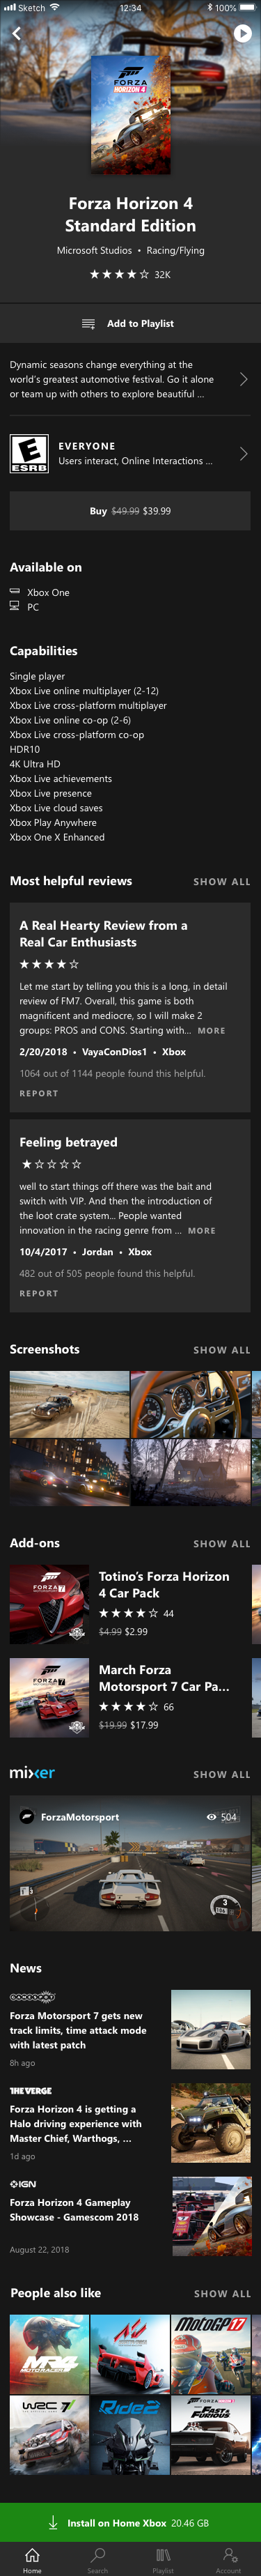 Xbox Game Pass Mobile Home scroll